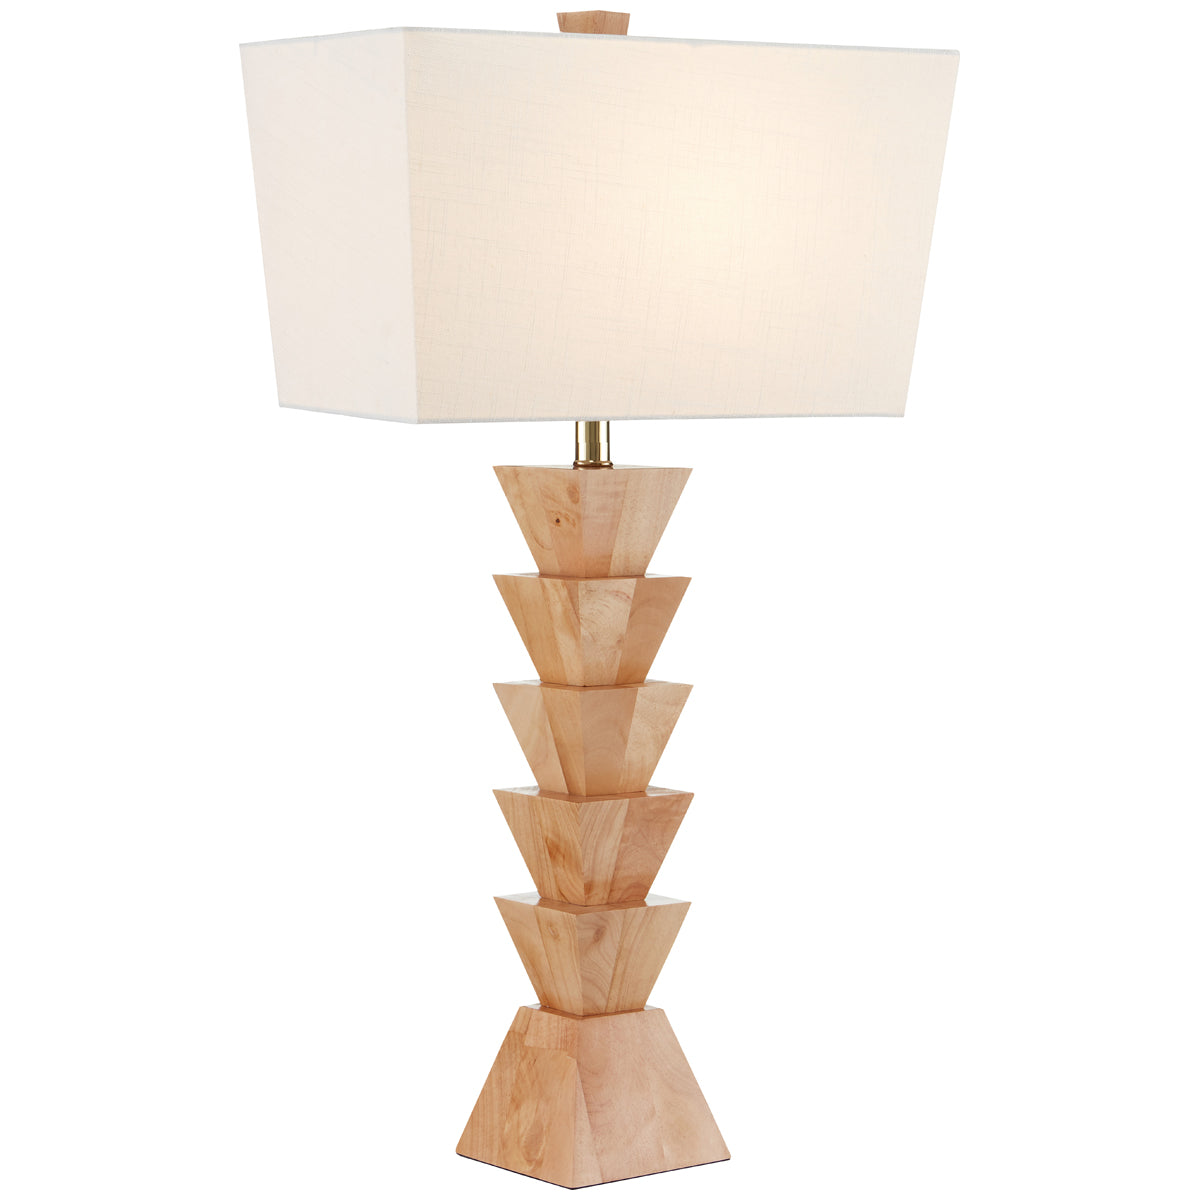 Currey and Company Elmstead Table Lamp